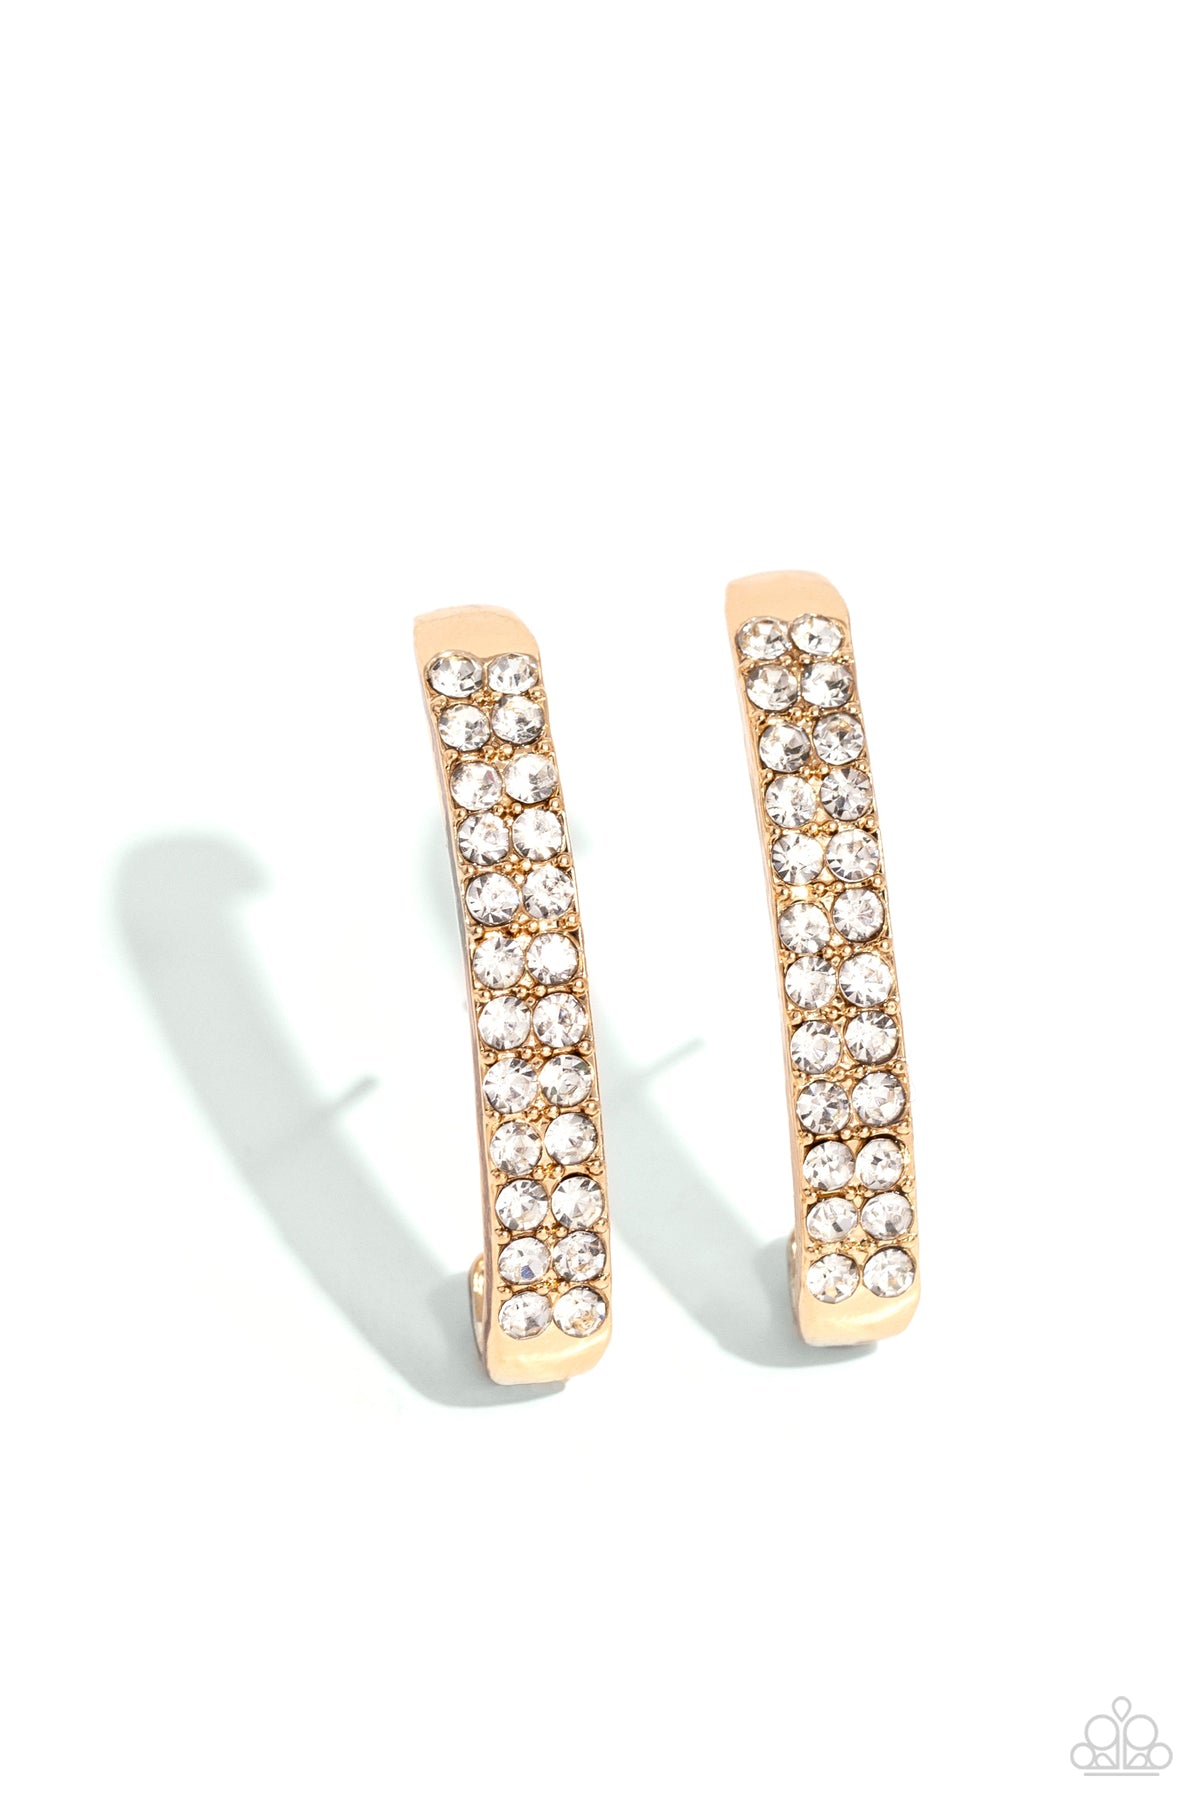 Sliding Series Gold &amp; White Rhinestone Adjustable Illusion Post Earrings - Paparazzi Accessories- lightbox - CarasShop.com - $5 Jewelry by Cara Jewels